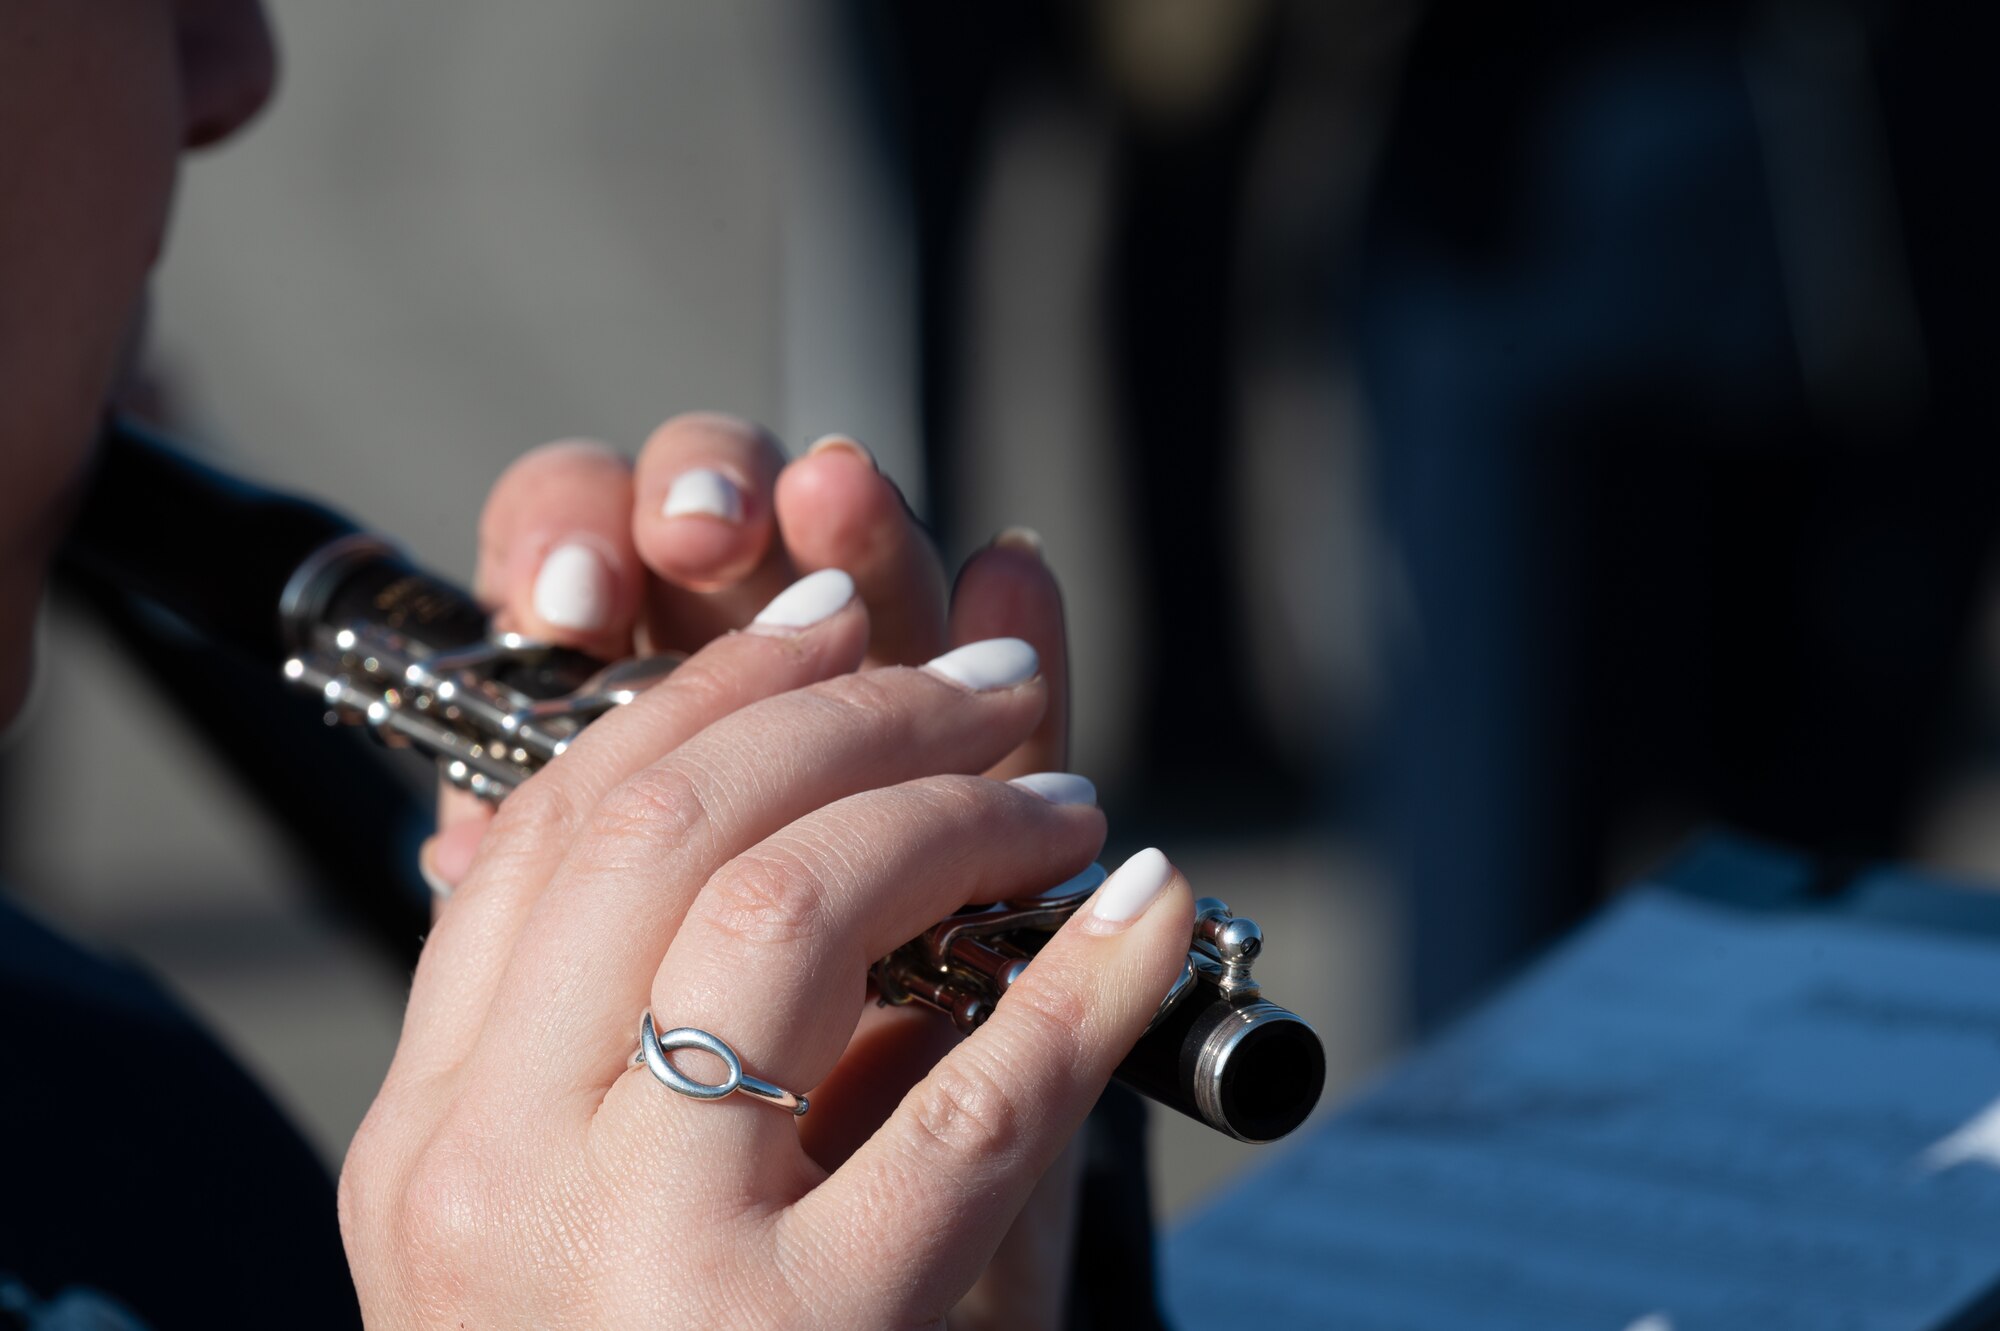 U.S. Air Force Tech Sgt. Carolyn Sierichs, U.S. Air Forces in Europe Ceremonial Band flutist, plays the piccolo during the NATO Days event at Leoš Janáček Airport in Ostrava, Czech Republic, Sept. 16, 2023.